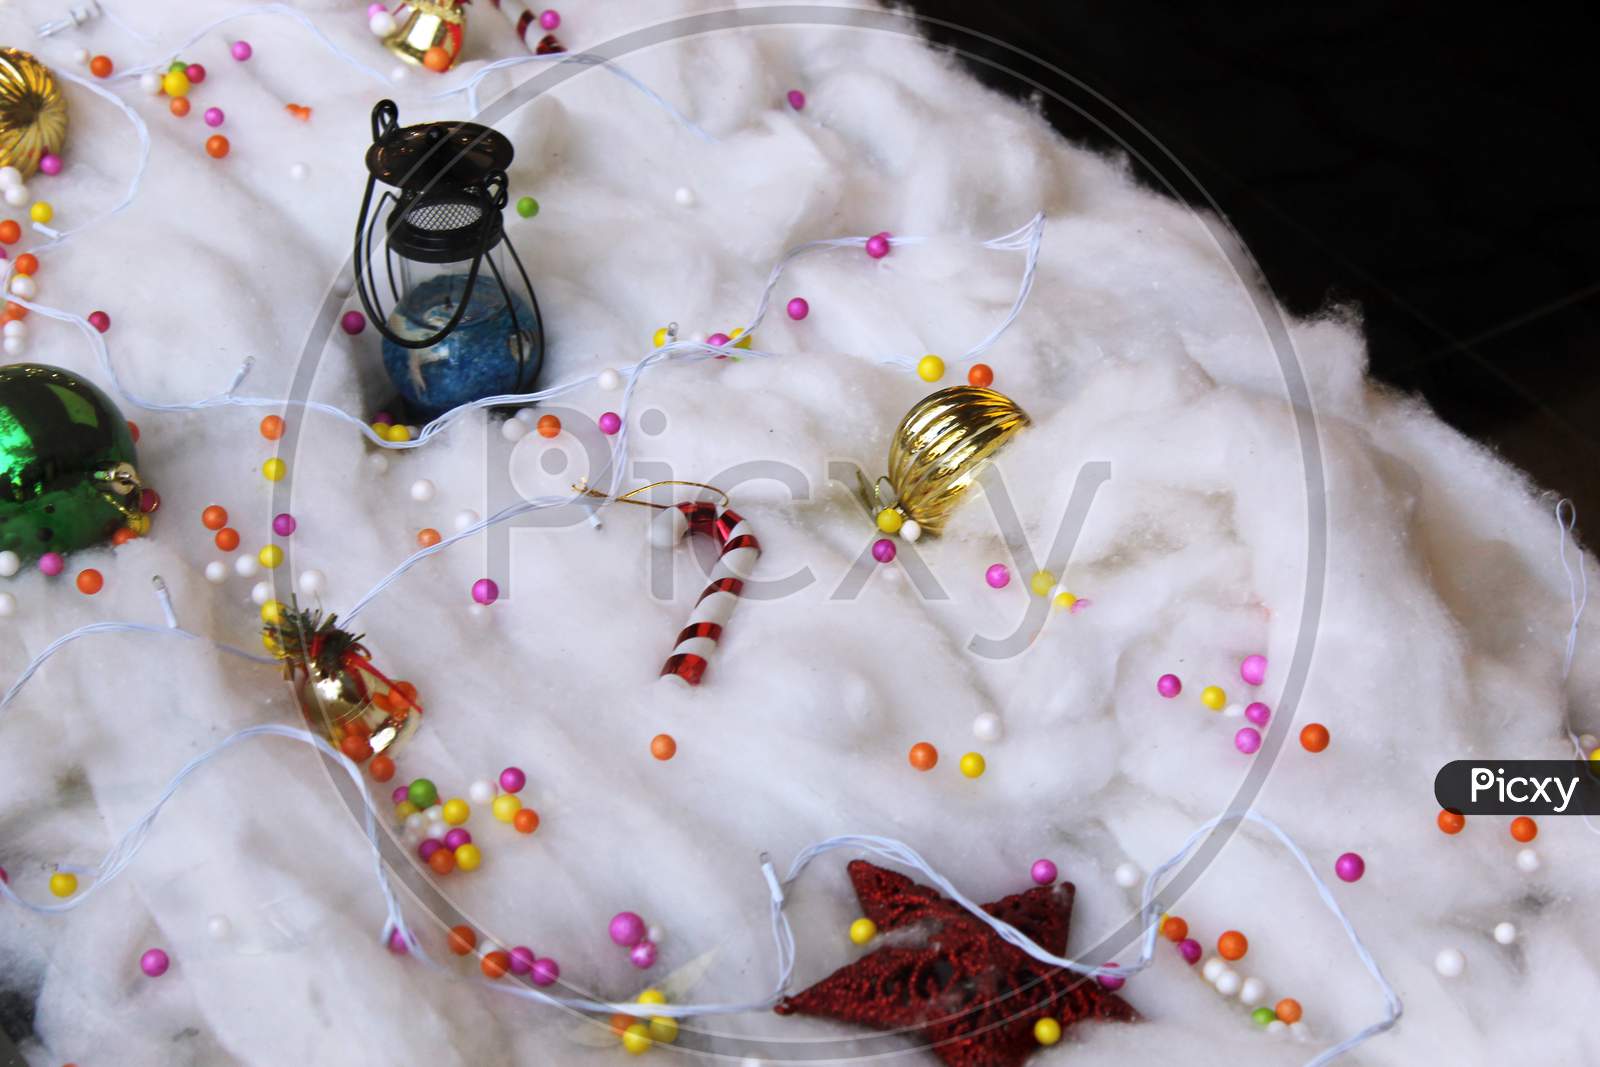 Dummy cotton made ice and Christmas decoration with various objects.